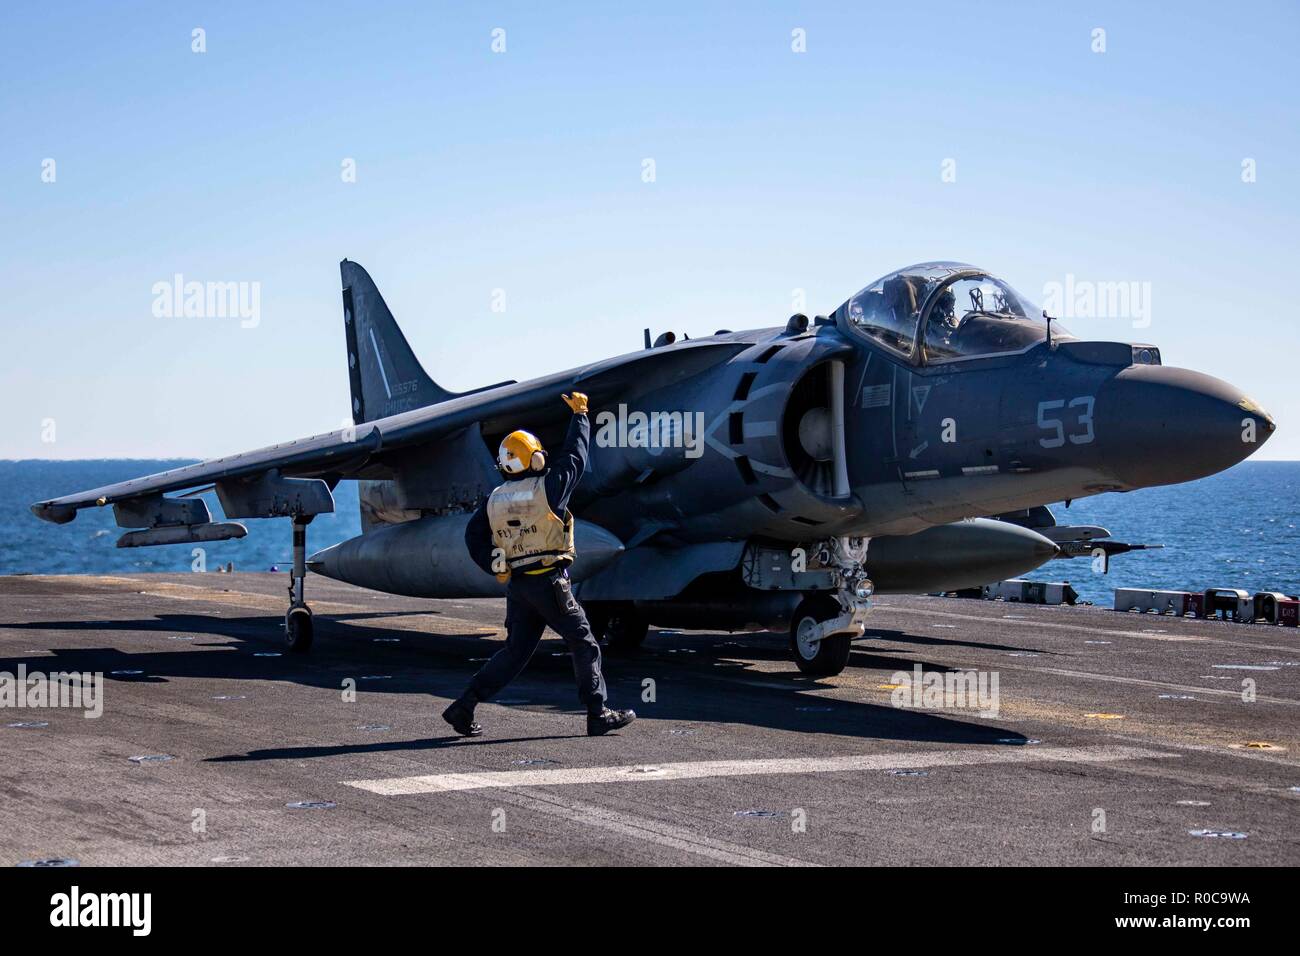 181029-N-KW492-0213 ATLANTIC OCEAN (Oct. 29, 2018) Aviation Boatswain's Mate (Handling) 2nd Class Reymond Rallos signals to the pilot of an AV-8B Harrier on the flight deck of the Wasp-class amphibious assault ship USS Kearsarge (LHD3) during the Carrier Strike Group (CSG) 4 composite training unit exercise (COMPTUEX). COMPTUEX is the final pre-deployment exercise that certifies the combined Kearsarge Amphibious Ready Group's and 22nd Marine Expeditionary Unit's abilities to conduct military operations at sea and project power ashore through joint planning and execution of challenging and real Stock Photo